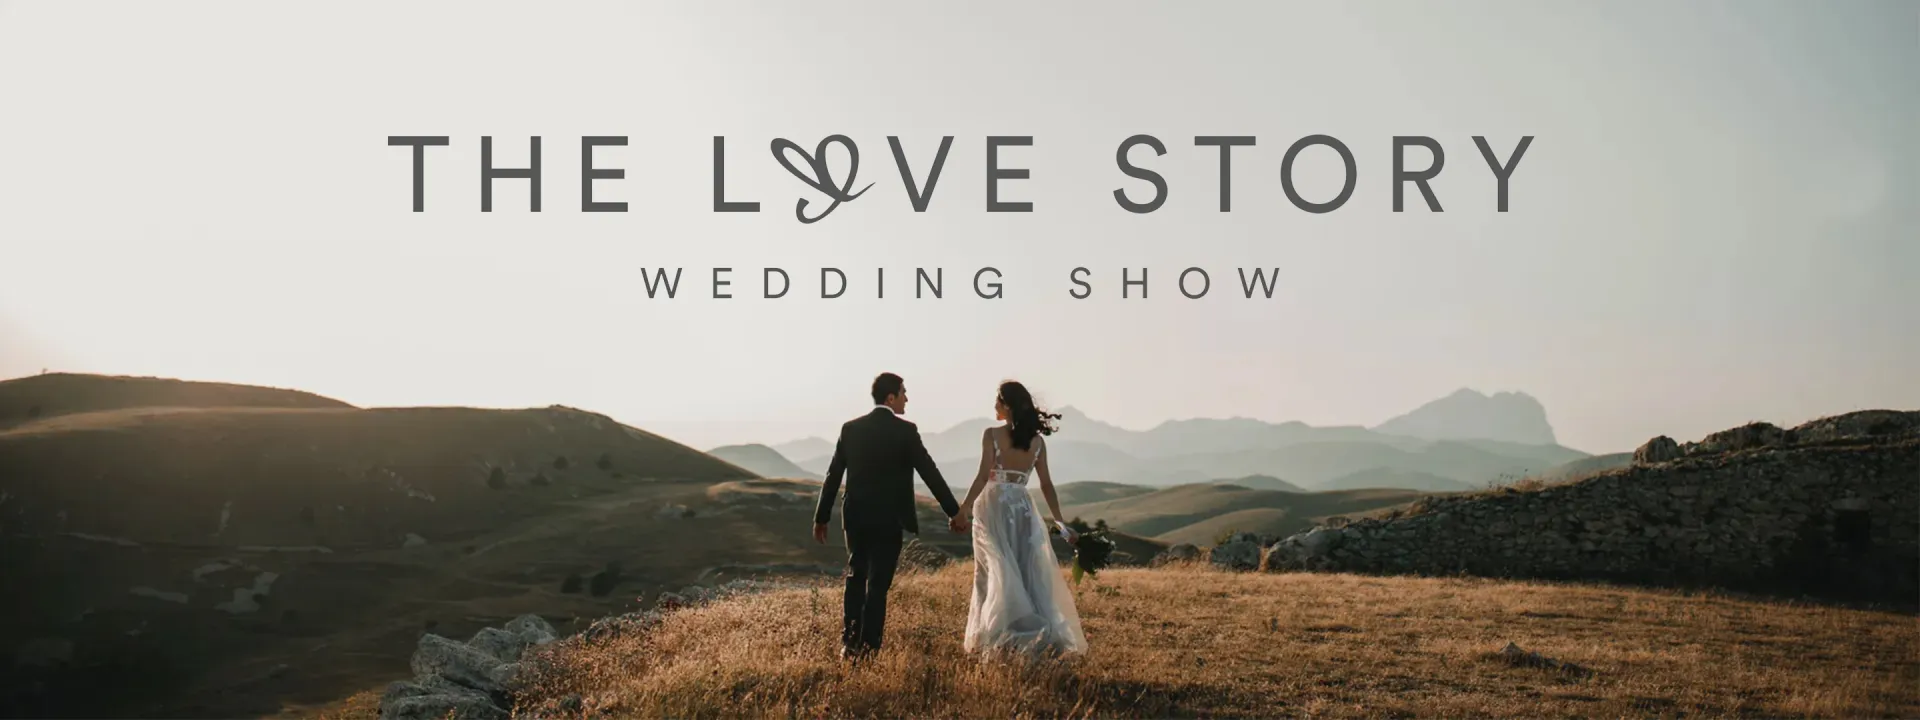 The Love Story Wedding Show